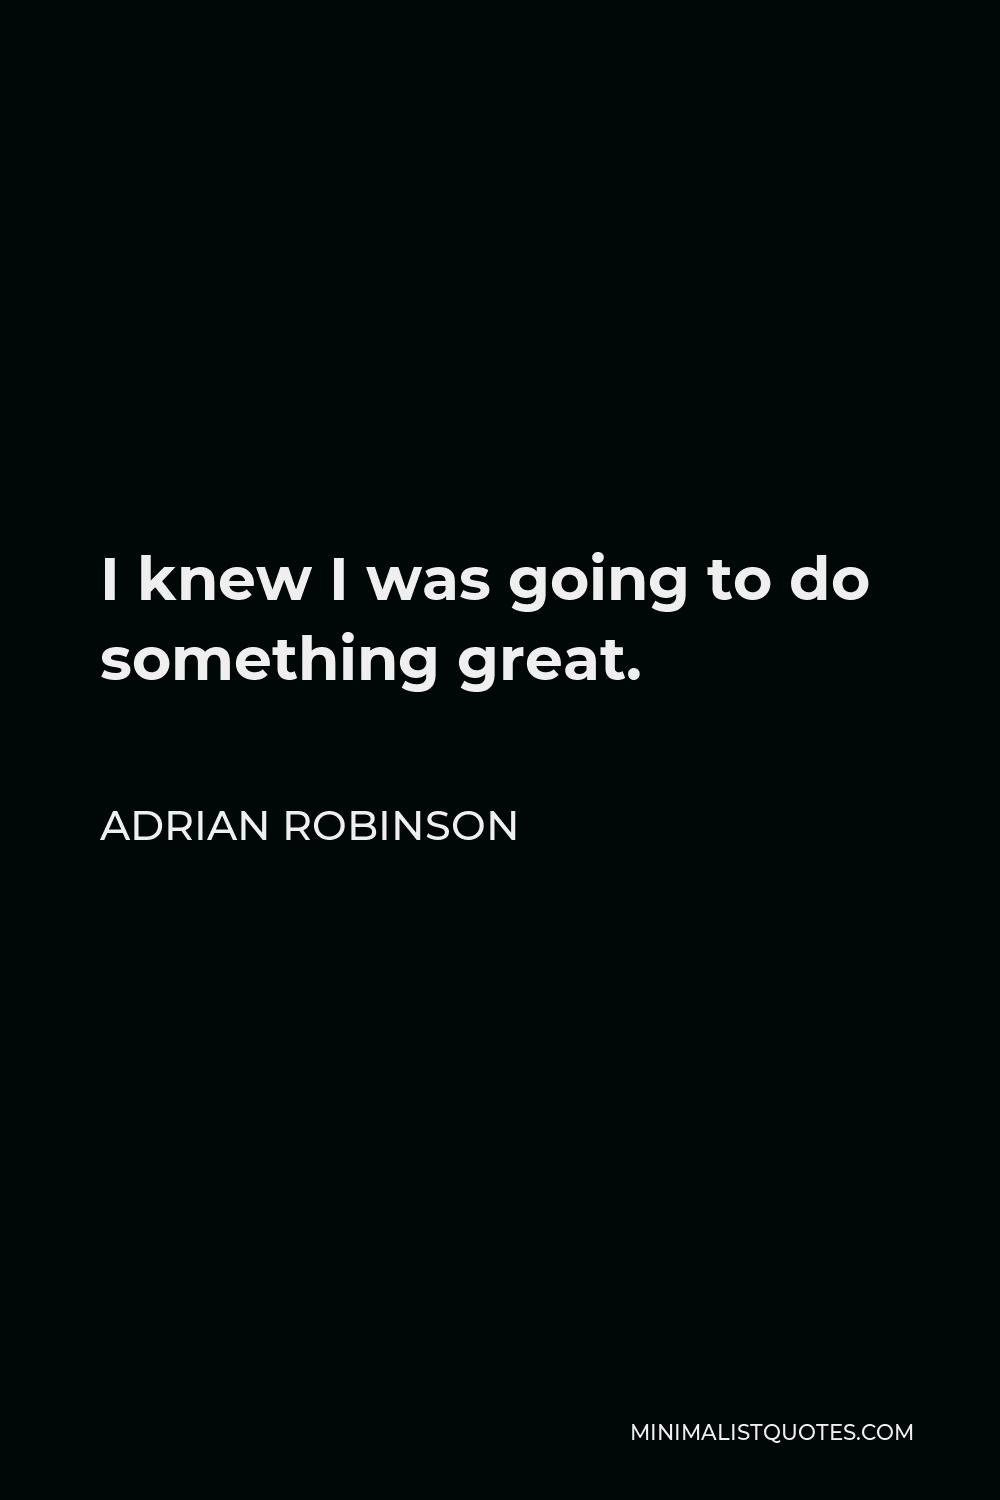 Adrian Robinson Quote - I knew I was going to do something great.